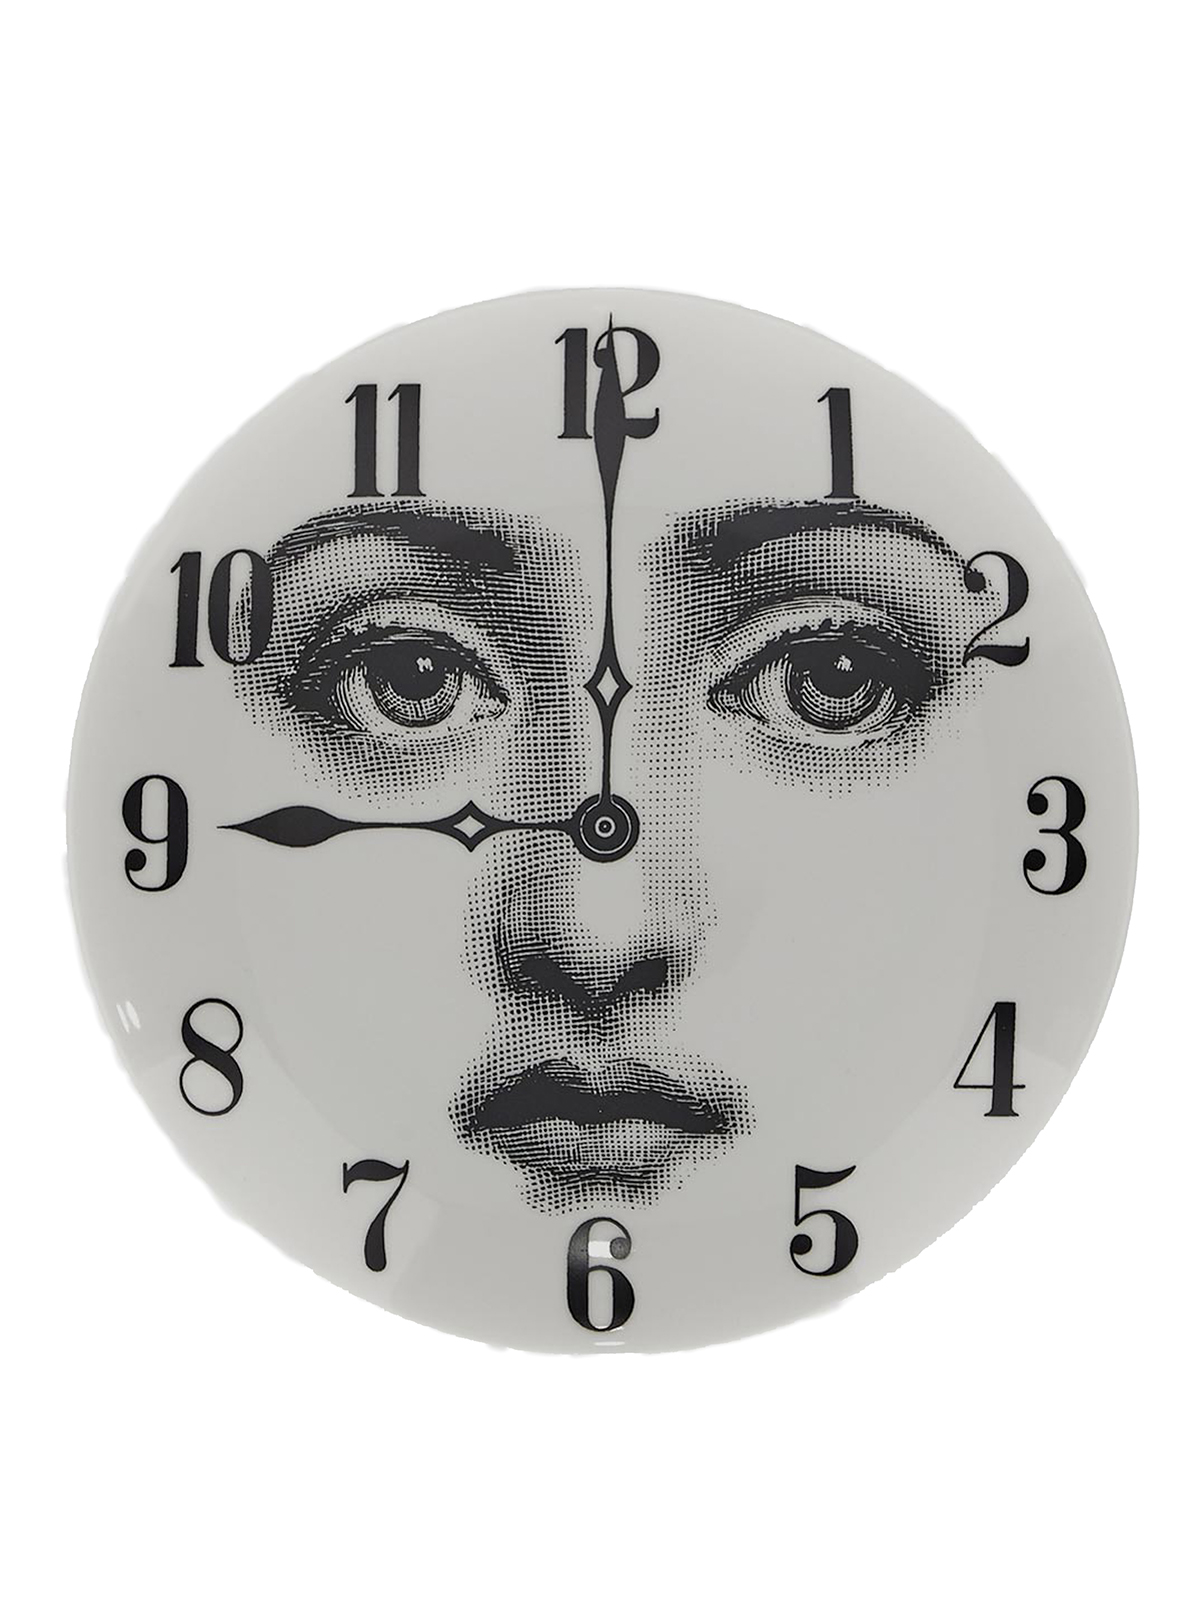 Lady in a Watch I, Original Designs Inspired by Fornasetti Plates, Original  Melamine Plate with Fornasetti Theme, Fornasetti St… | Fornasetti, Piero  fornasetti, Art